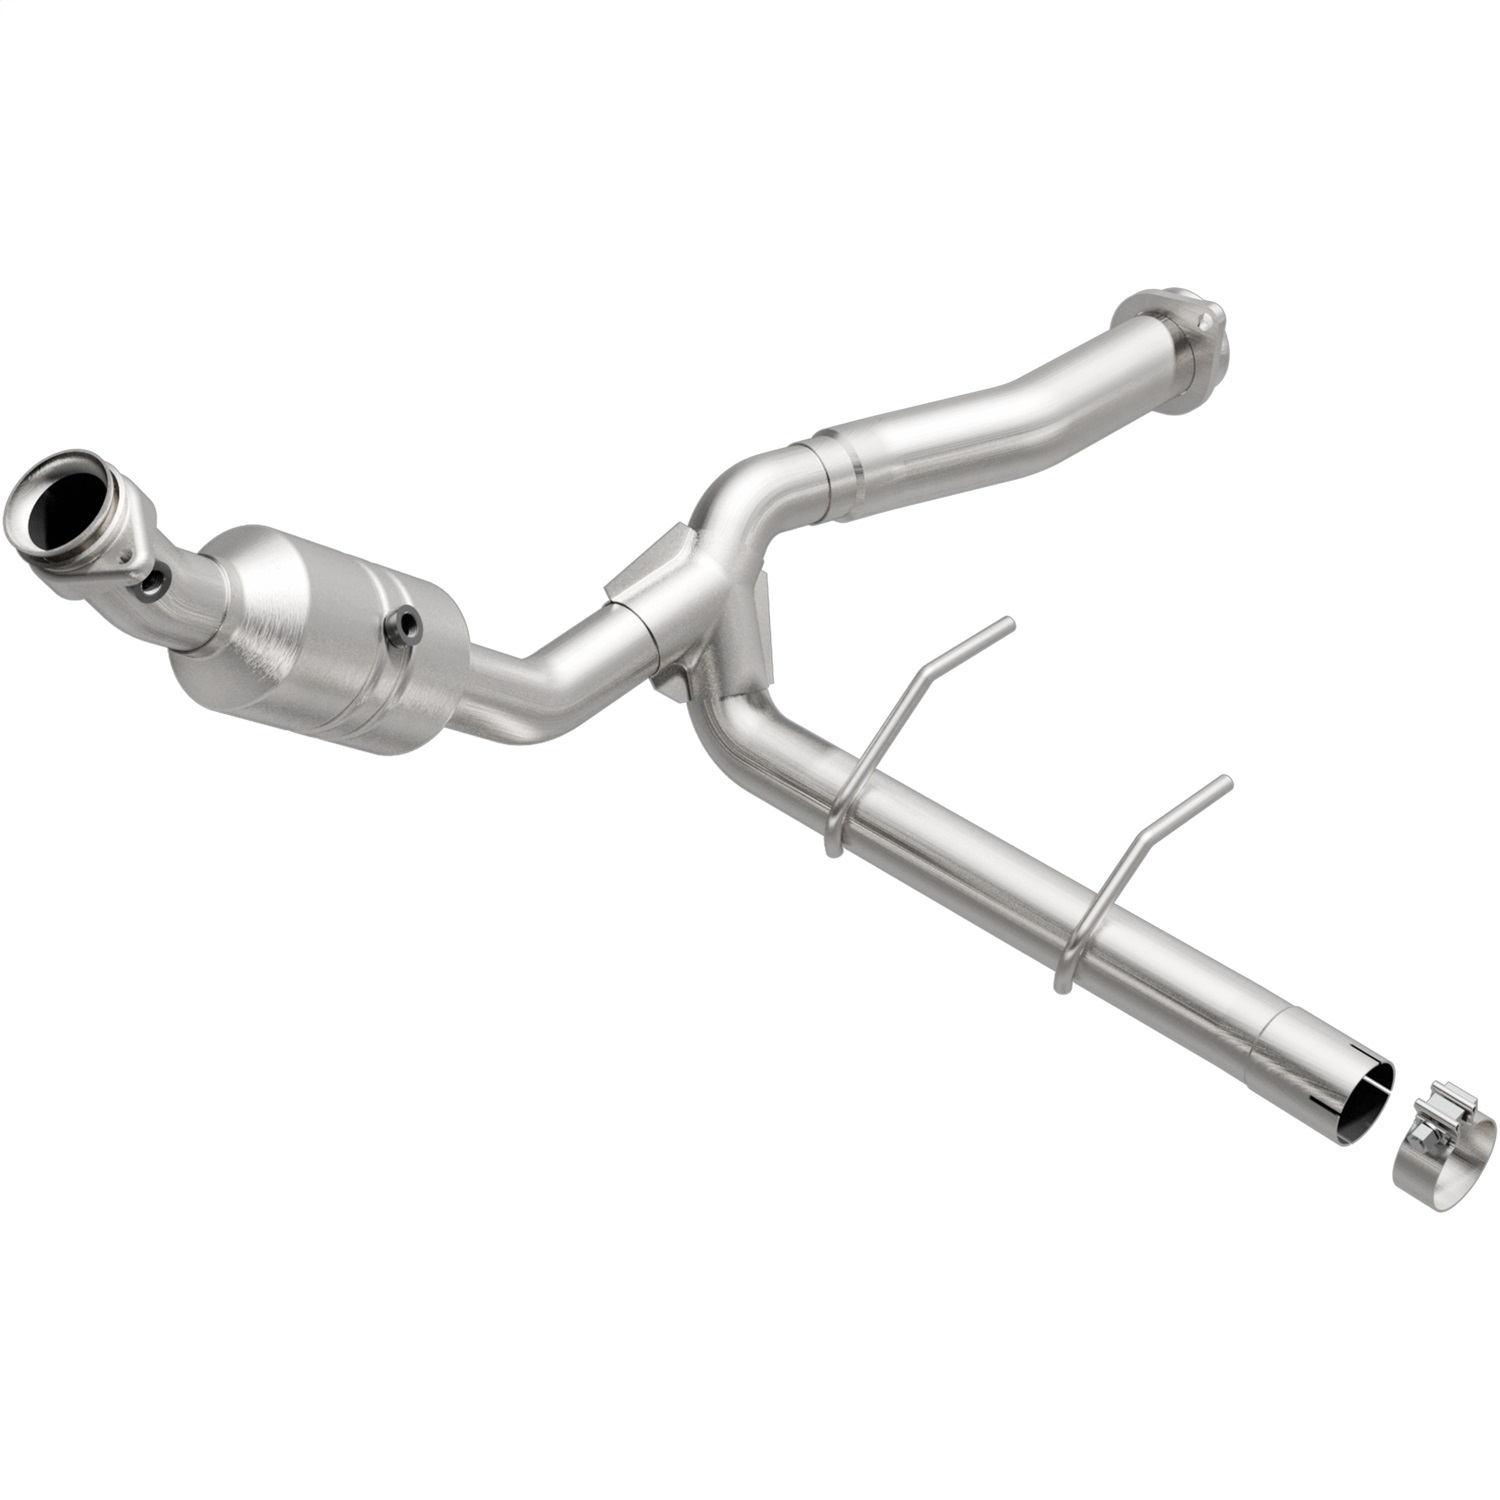 MagnaFlow Exhaust Products MagnaFlow 49 State Converter 52139 Direct Fit Catalytic Converter Fits F-150